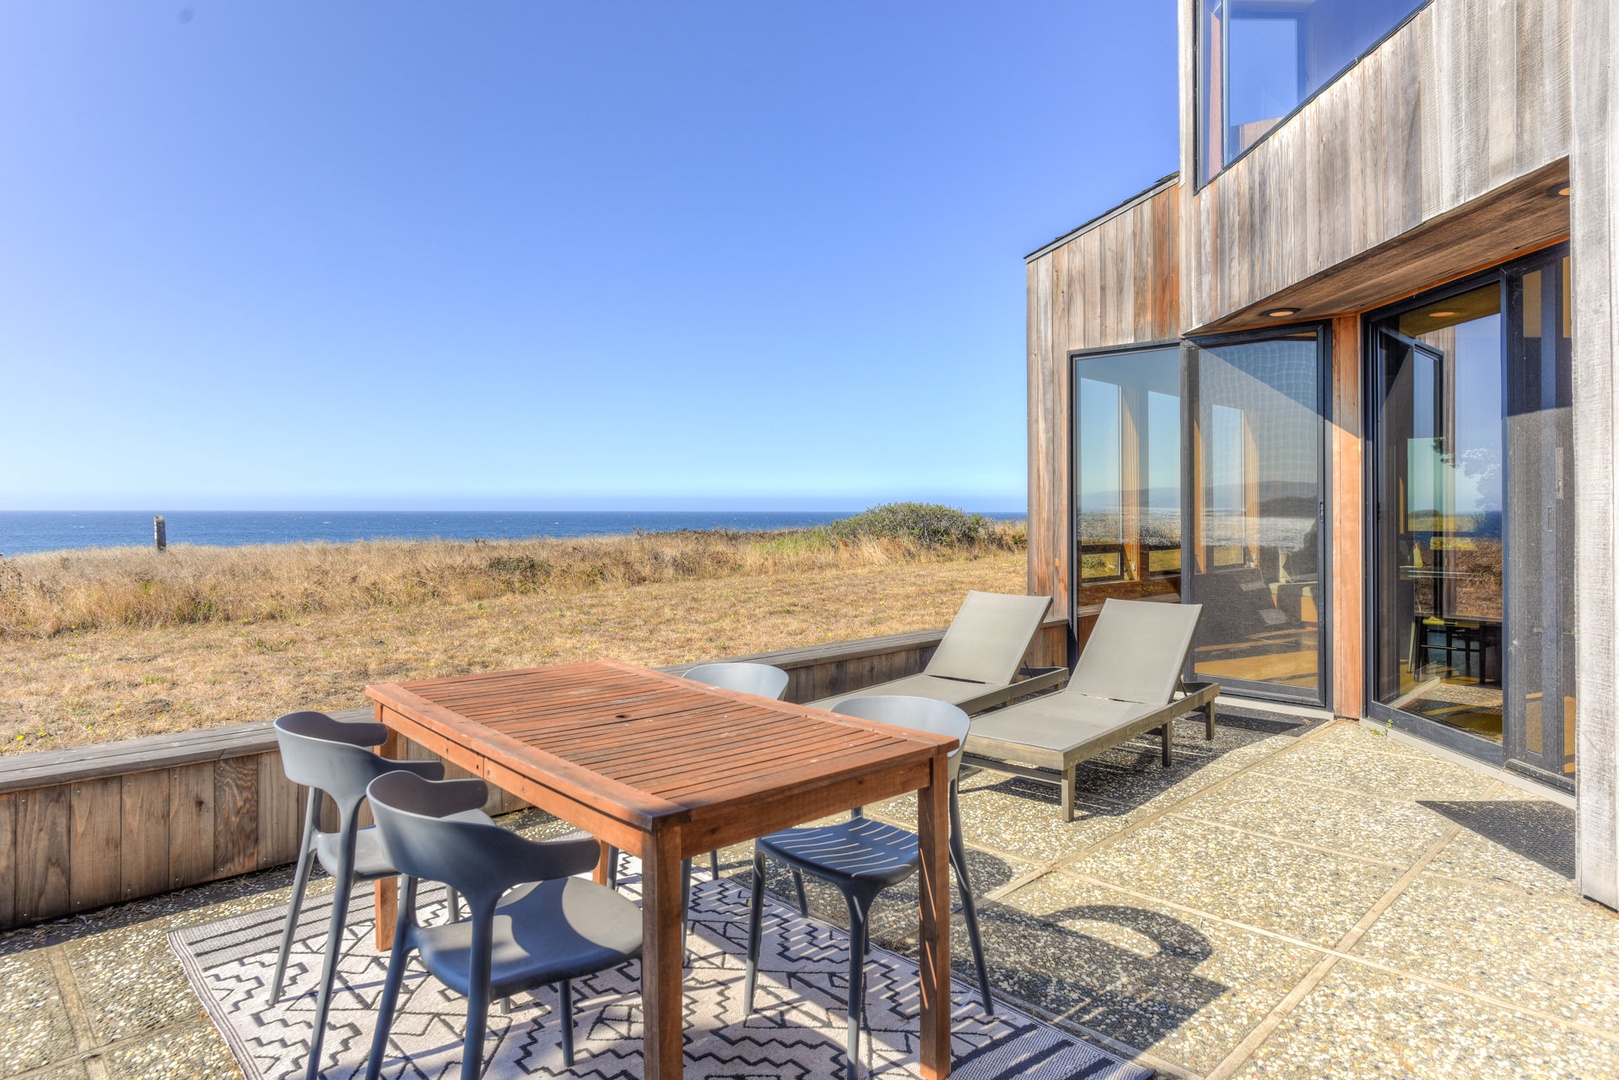 Outdoor seating for 4 and lounge chairs with ocean views